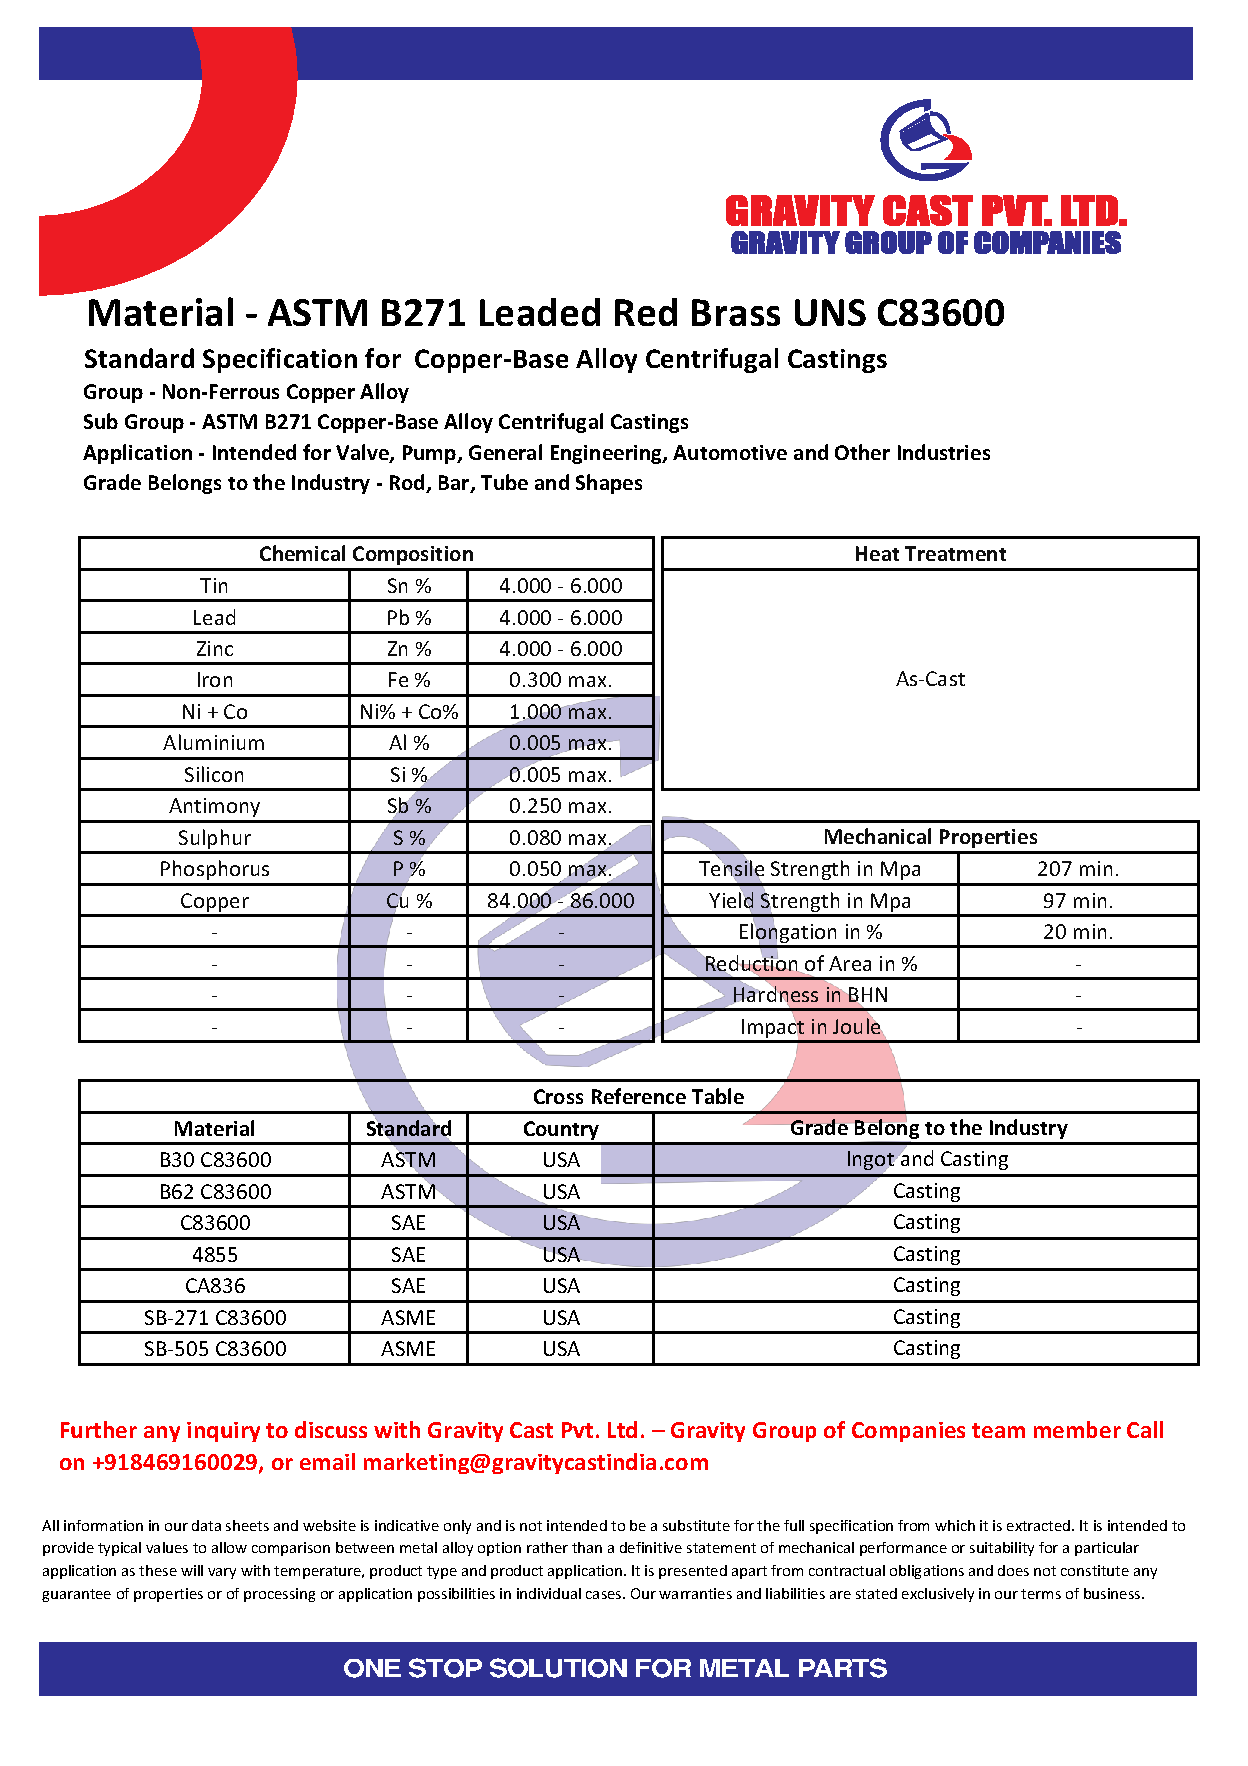 ASTM B271 Leaded Red Brass UNS C83600.pdf